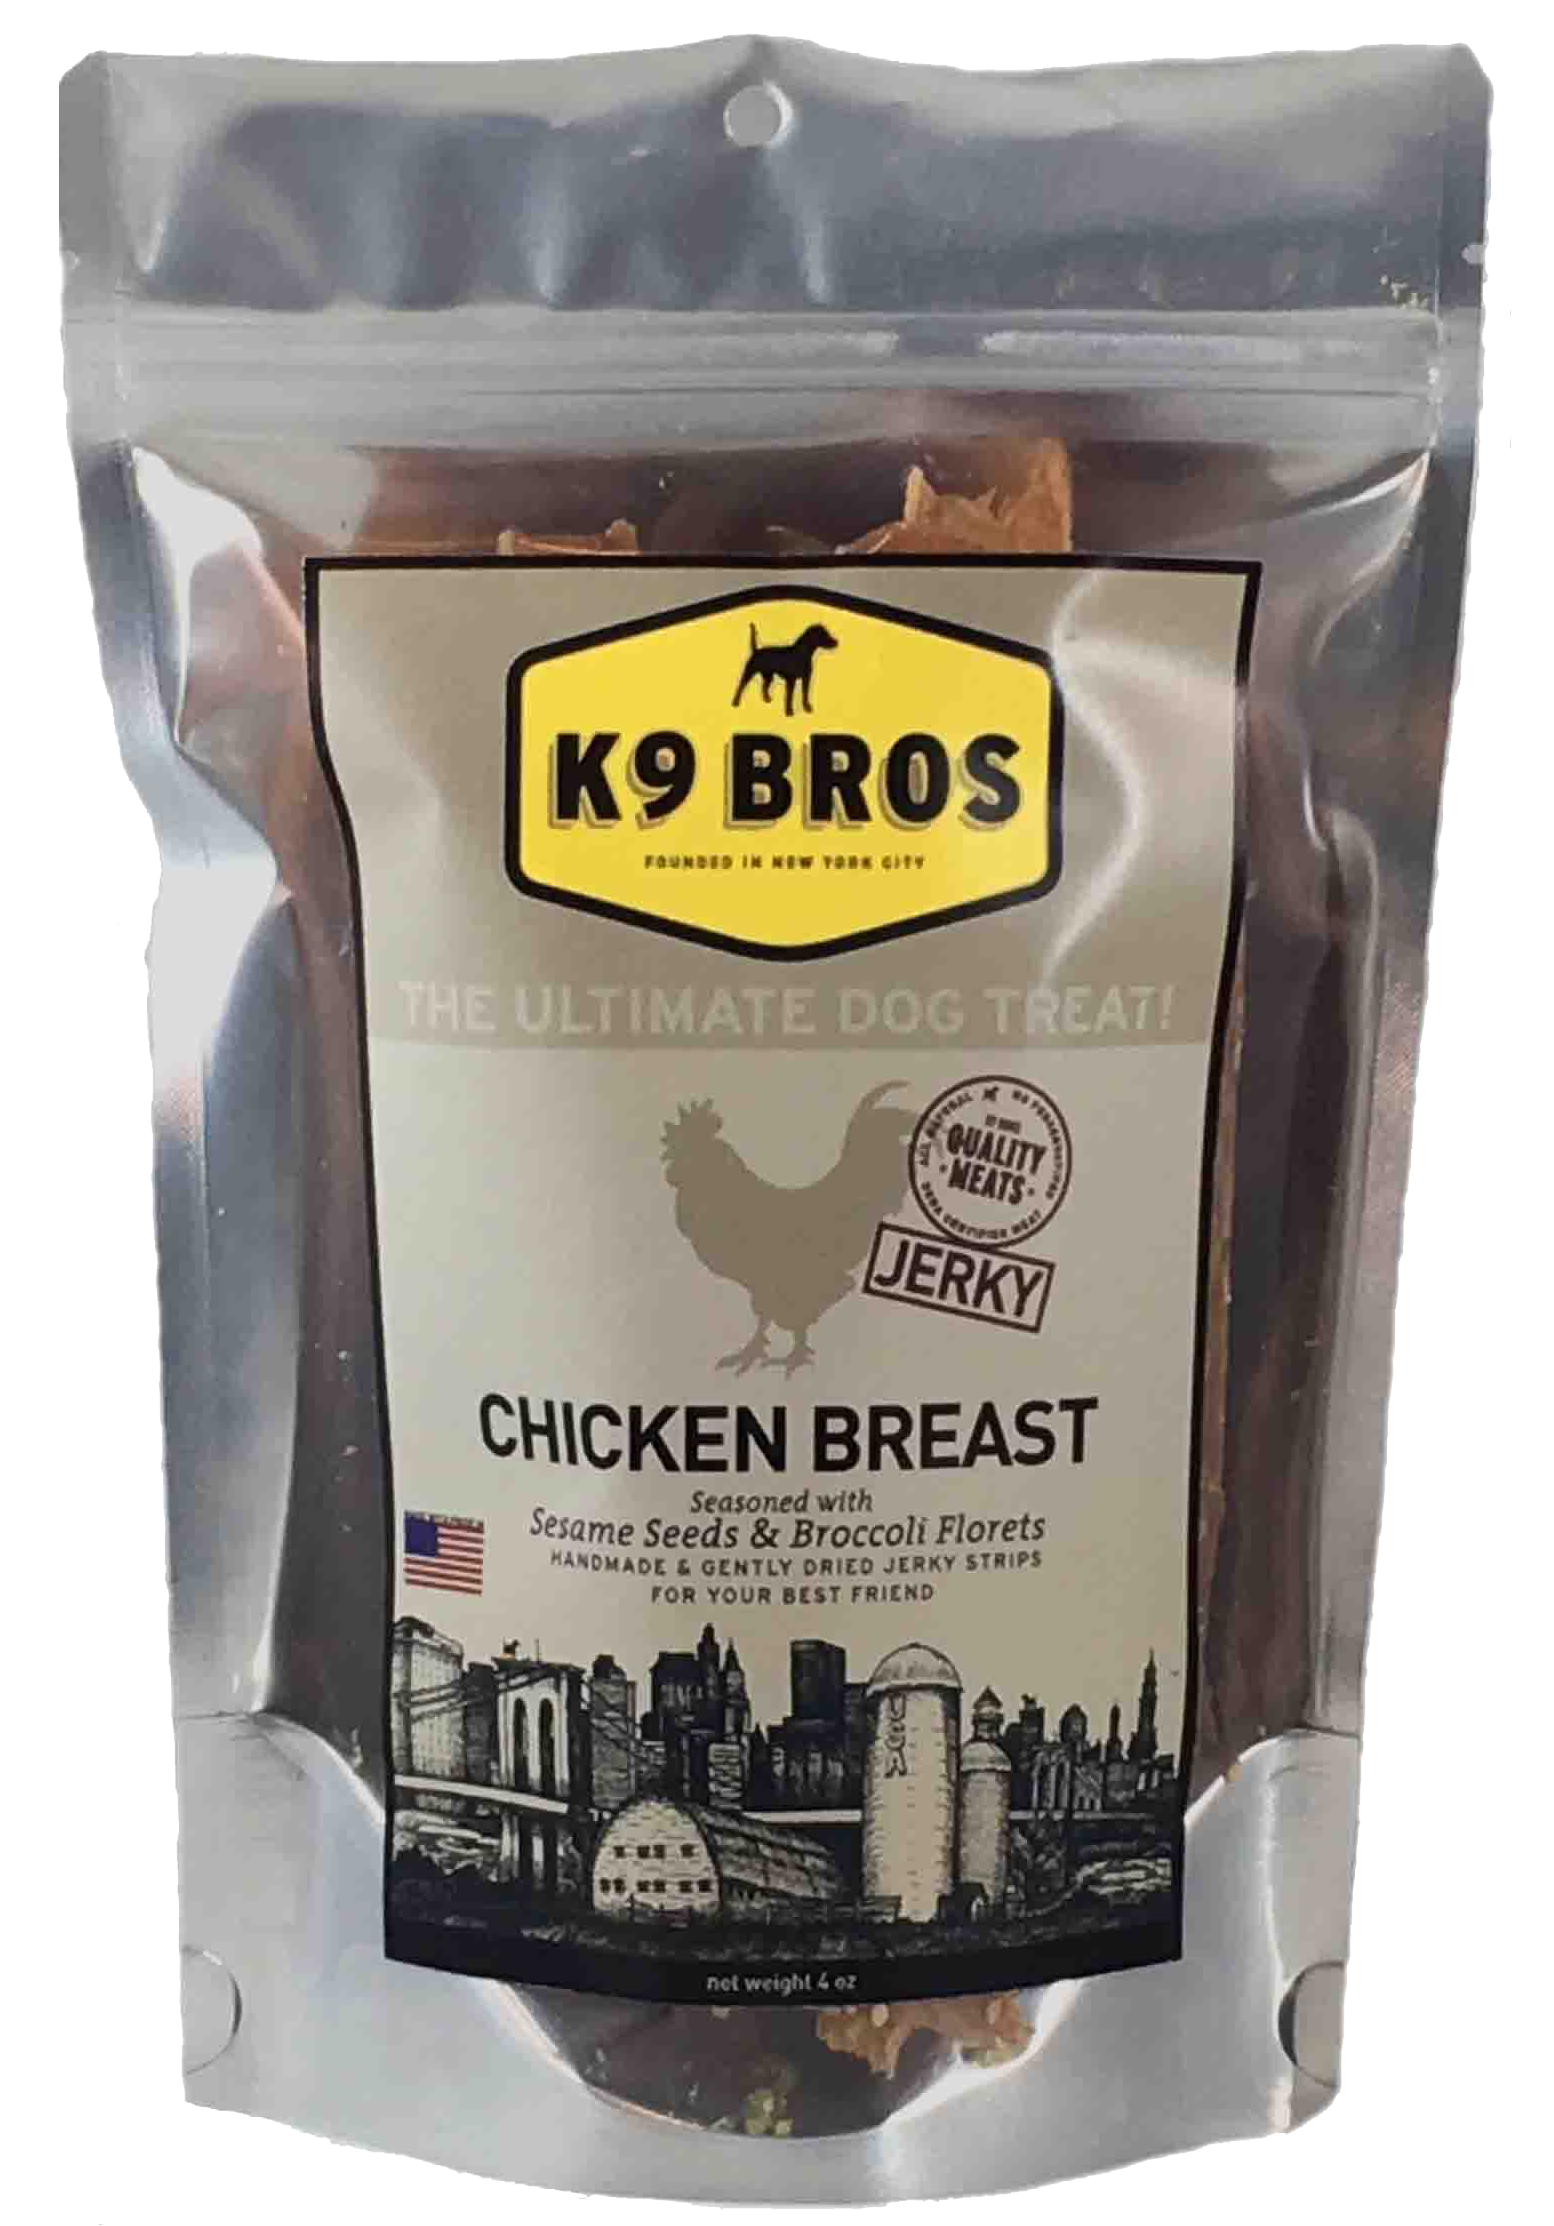 Chicken Breast[the ultimate dog treat]